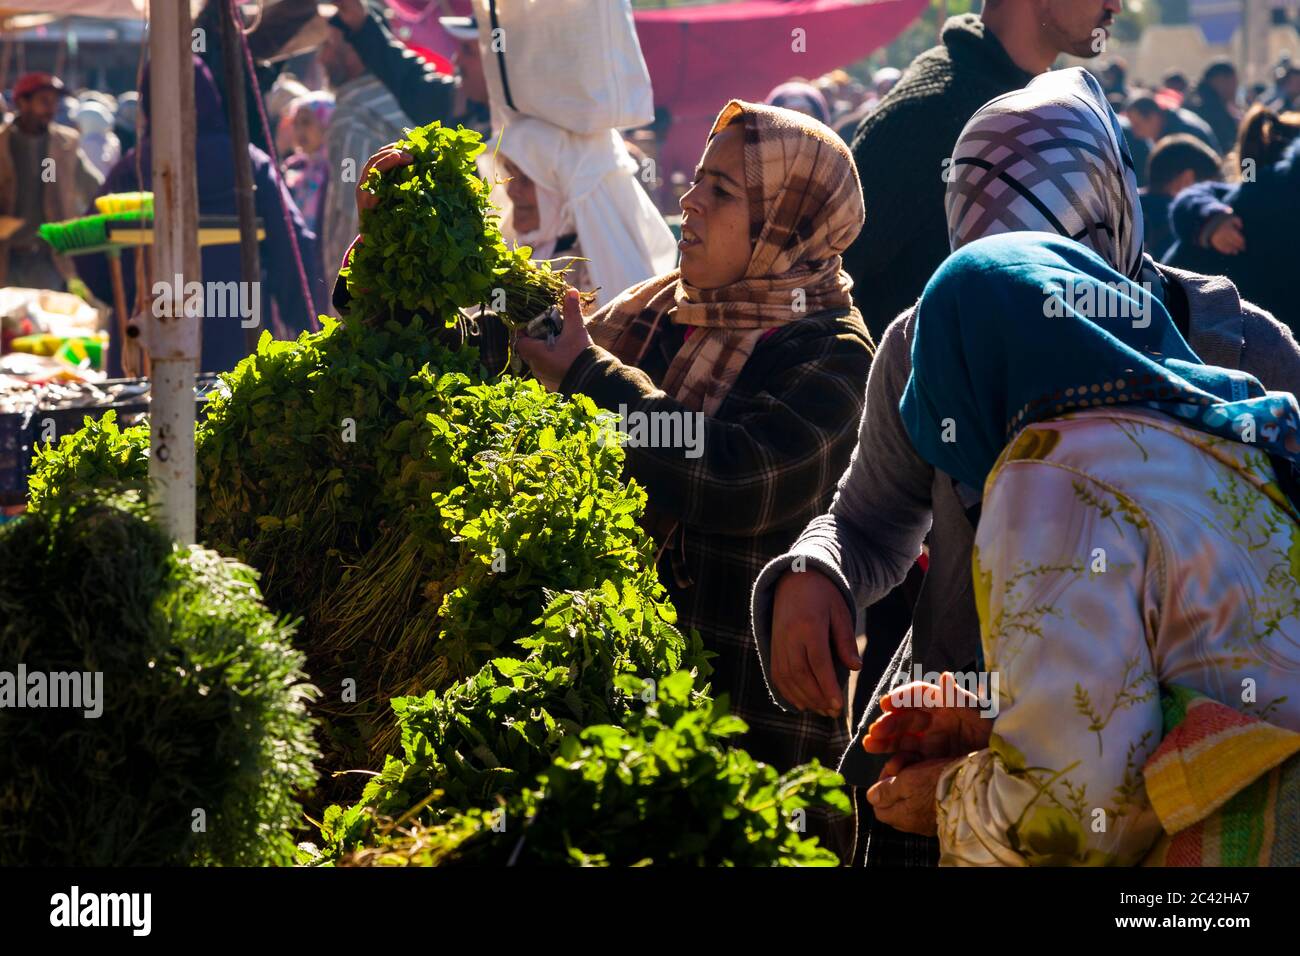 Impressions of Morocco: Parsley in the vegetable market Stock Photo